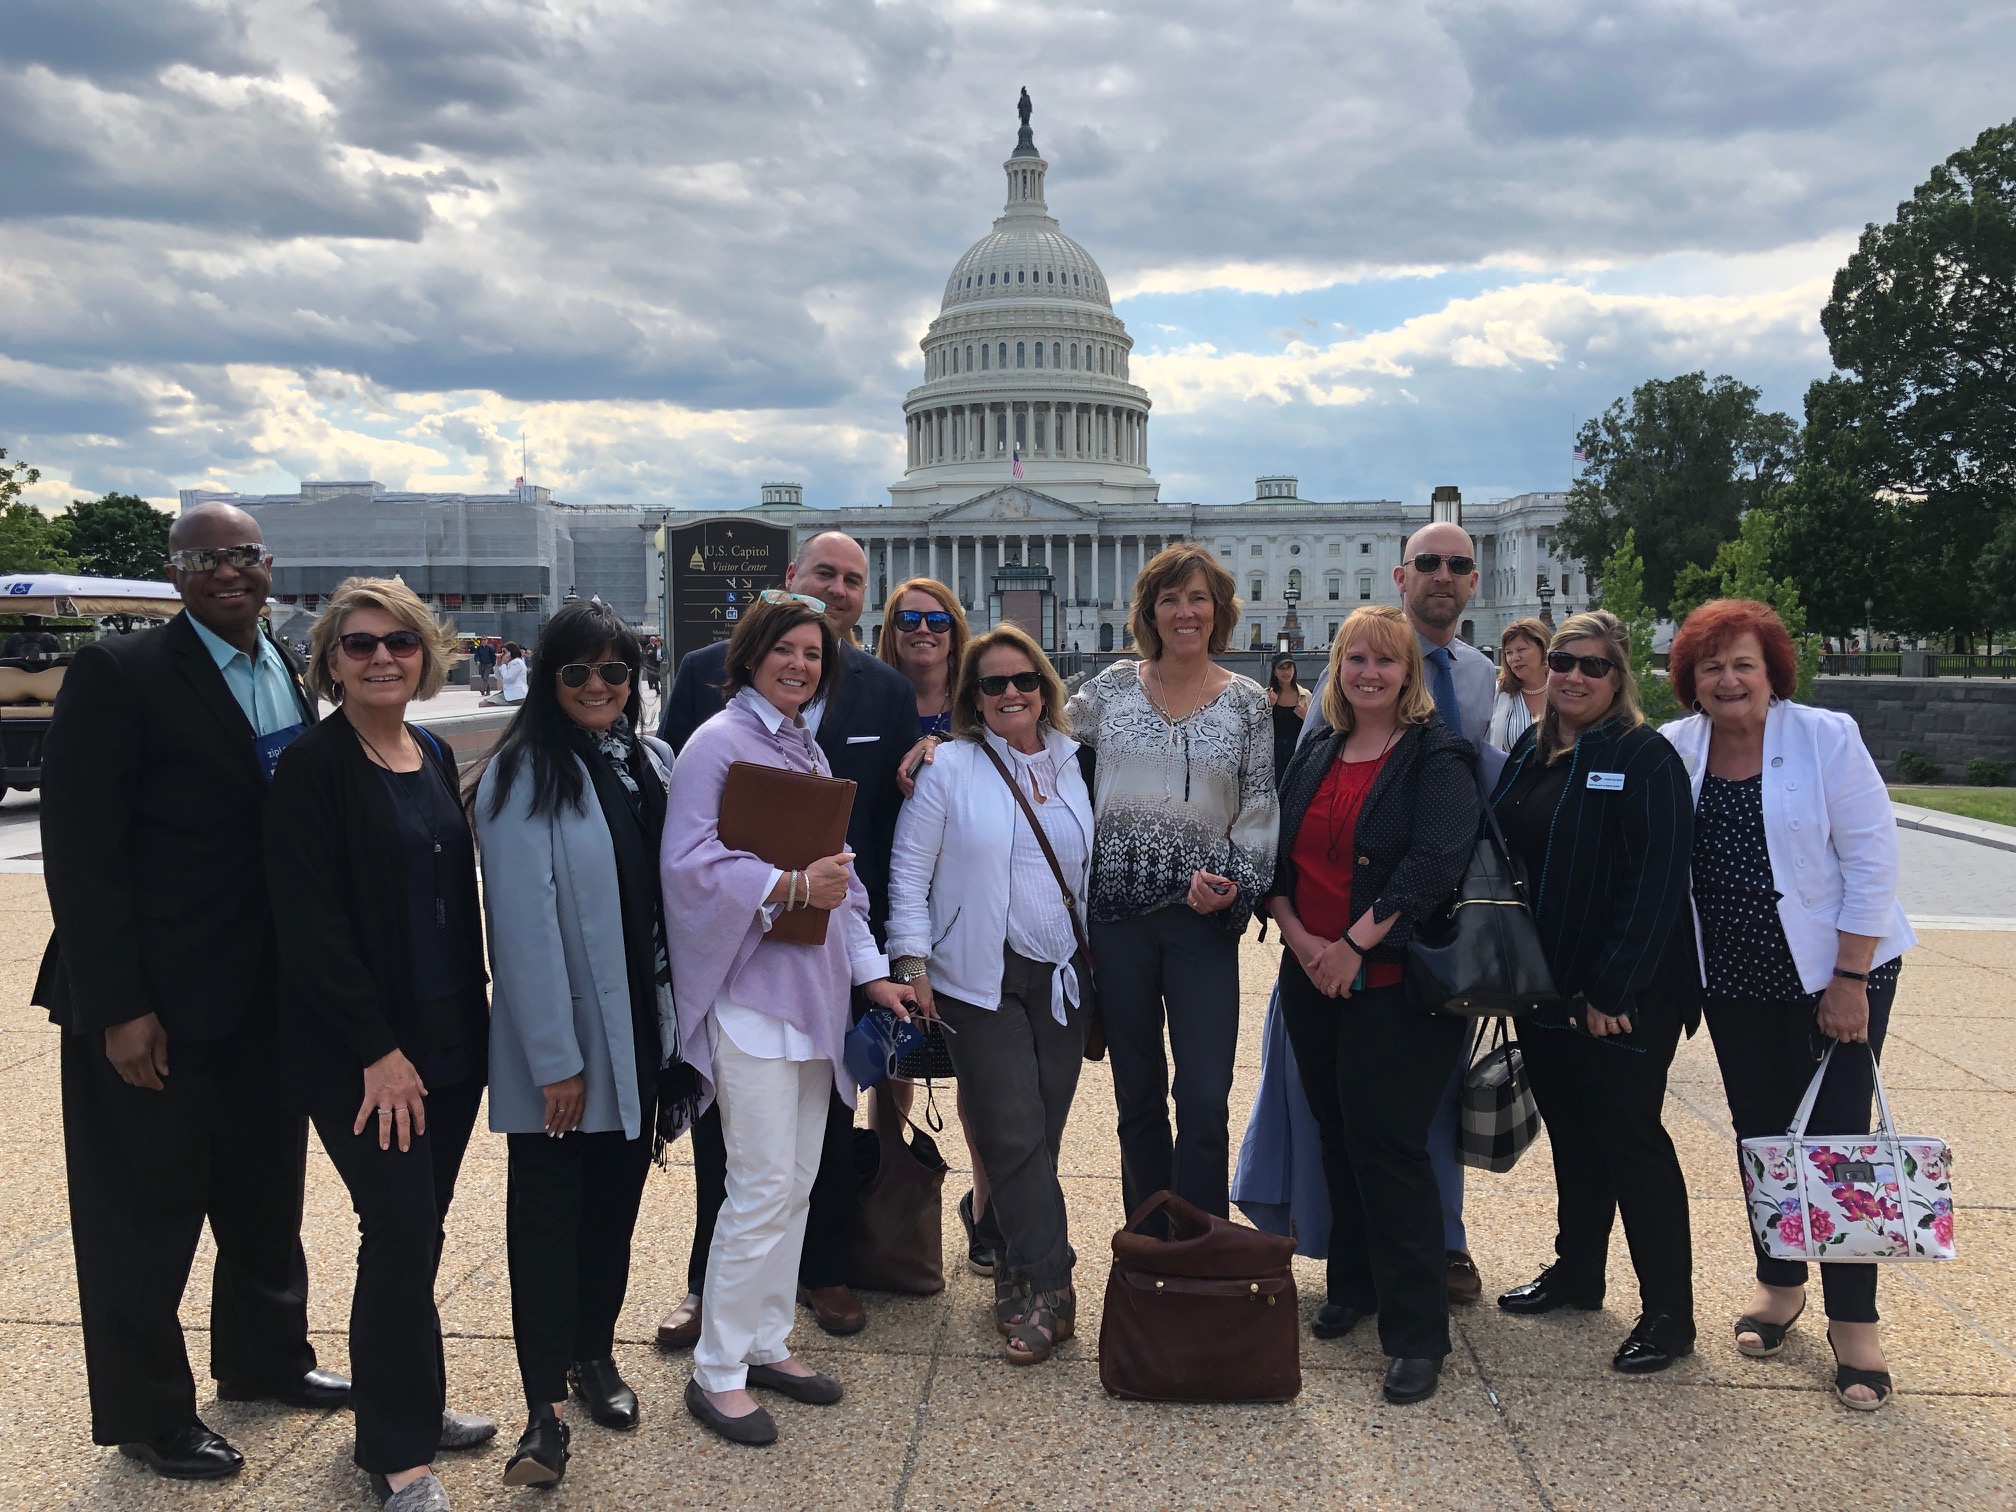 REALTORS gathered in front of the Capitol for NAR Midyear Meetings